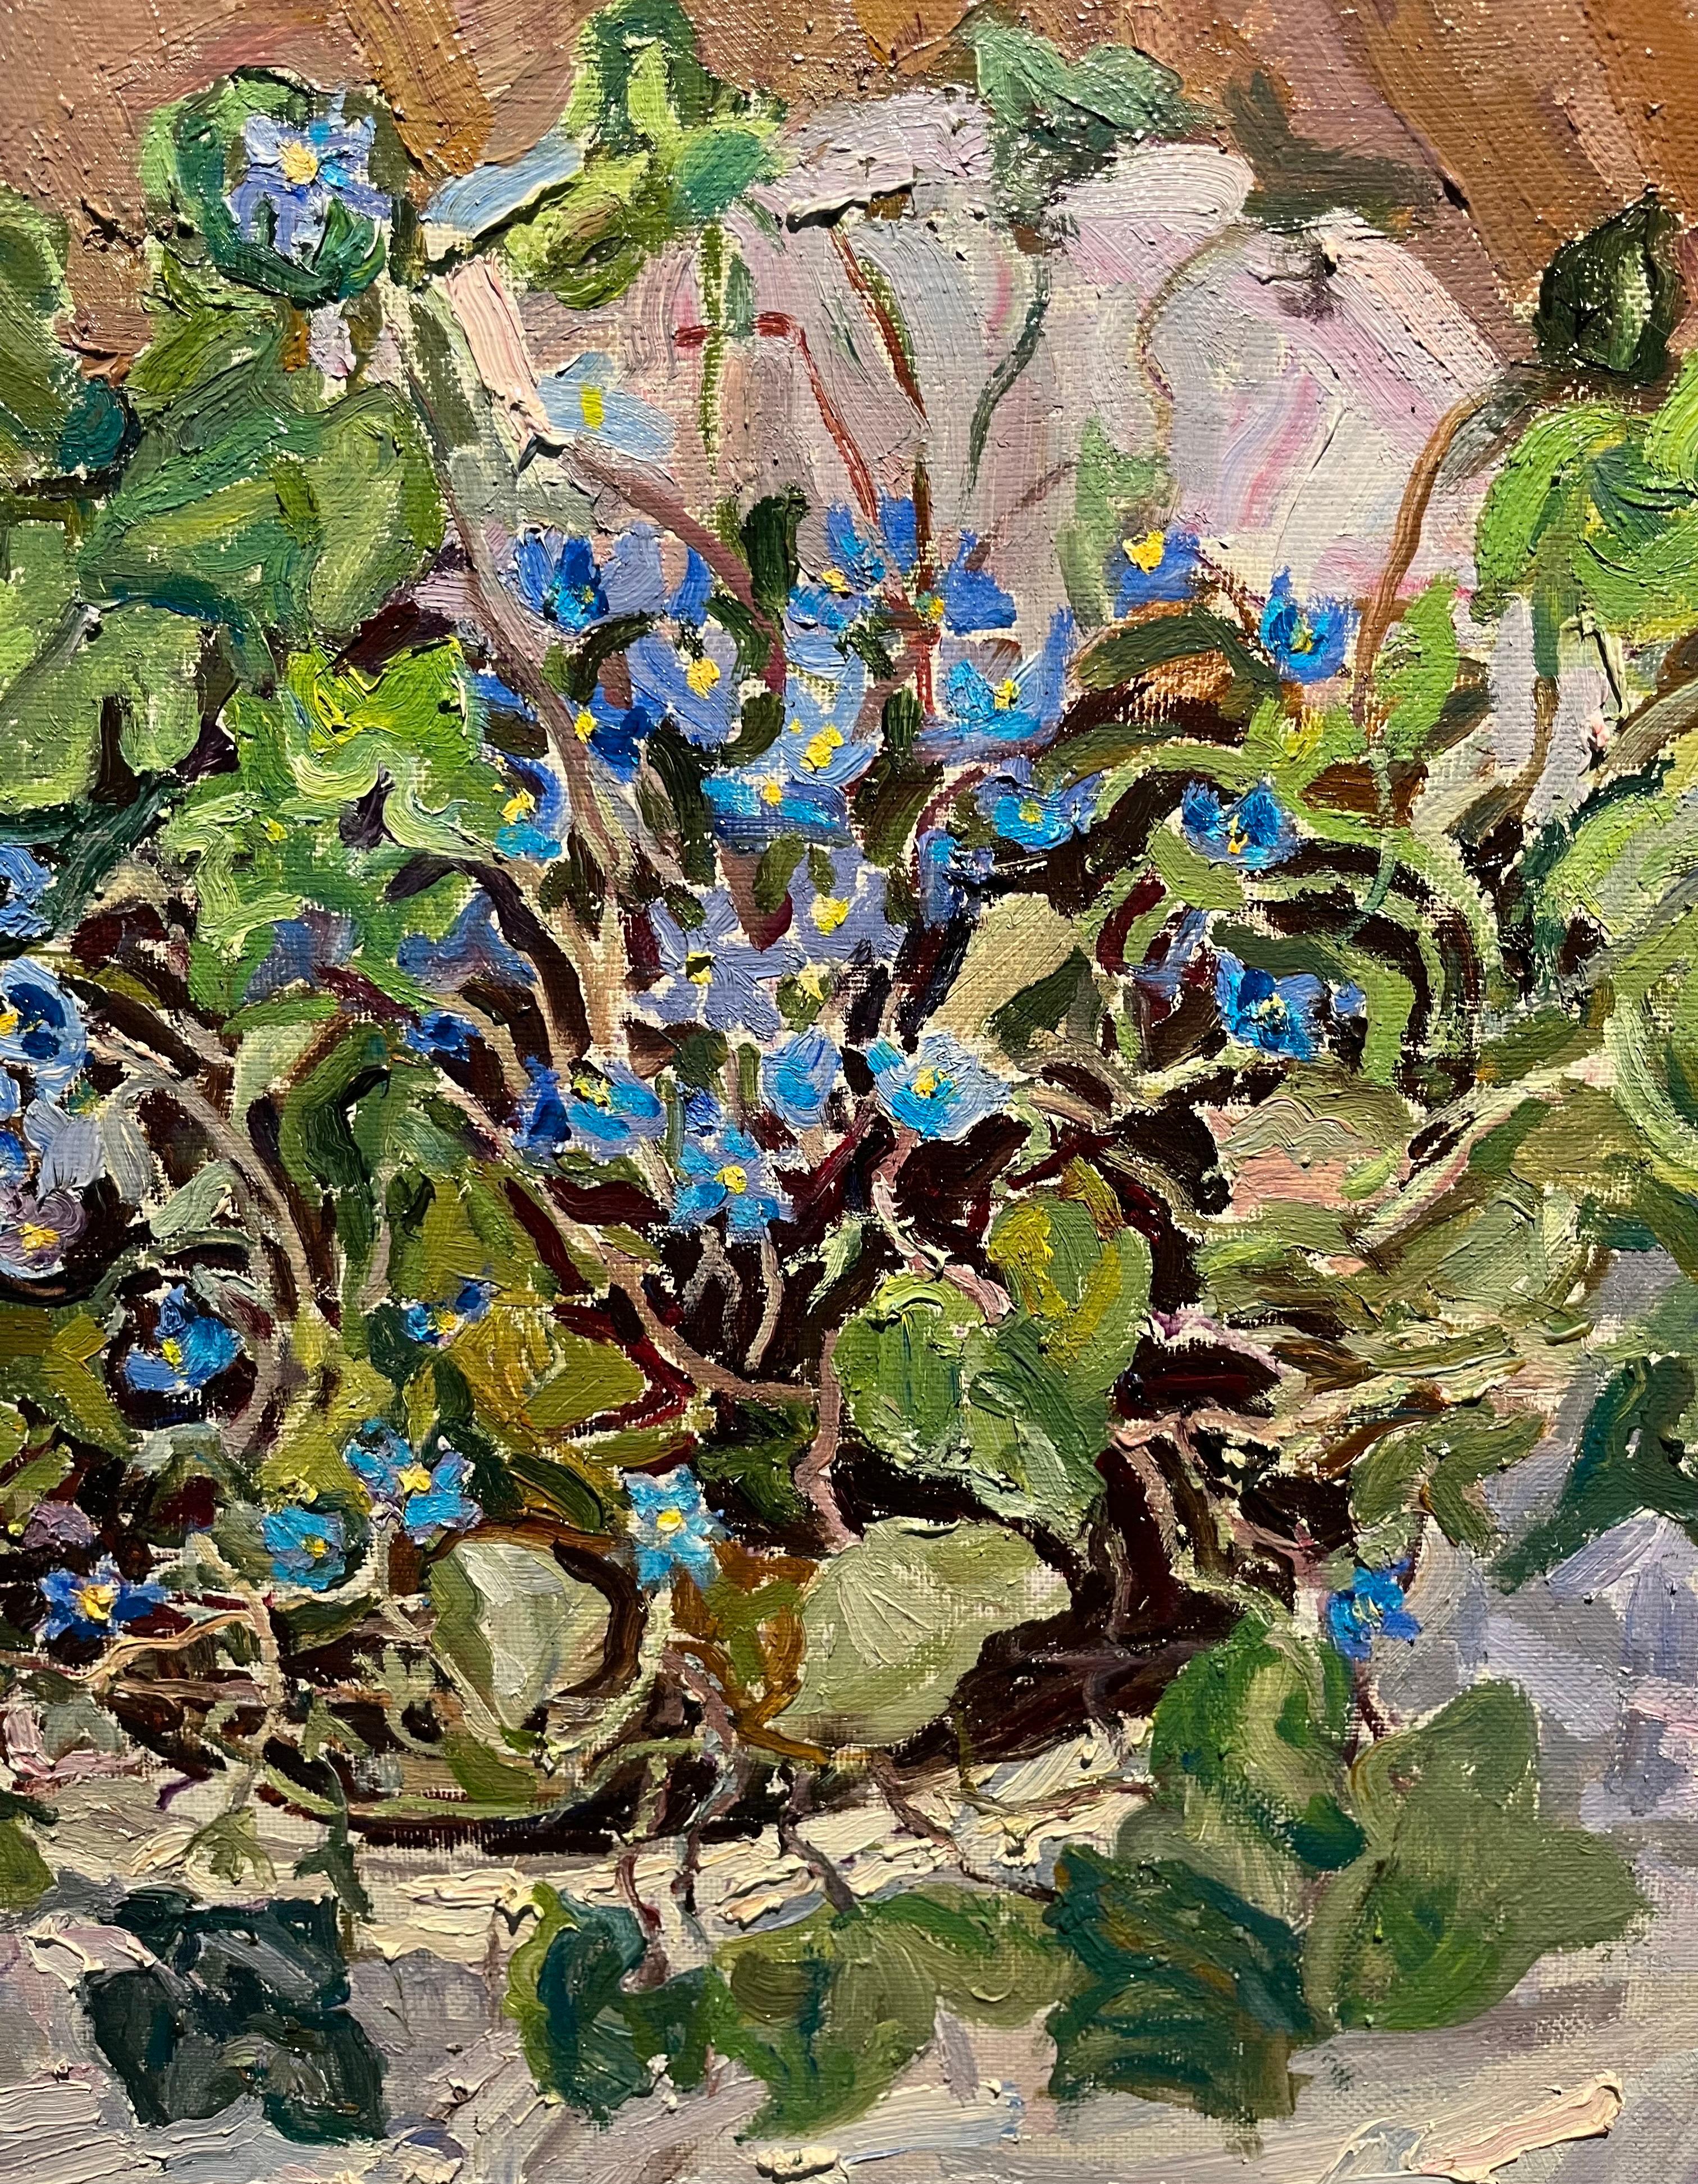 flowers ,violet, violets 
MAYA KOPITZEVA    (Gagra, Georgia, 1924 - 2005)

Maya Kopitzeva’s works have been acquired by the Russian Ministry of Culture, by the Foundation for the Russian Culture, by various collectors in Europe, Japan, United States